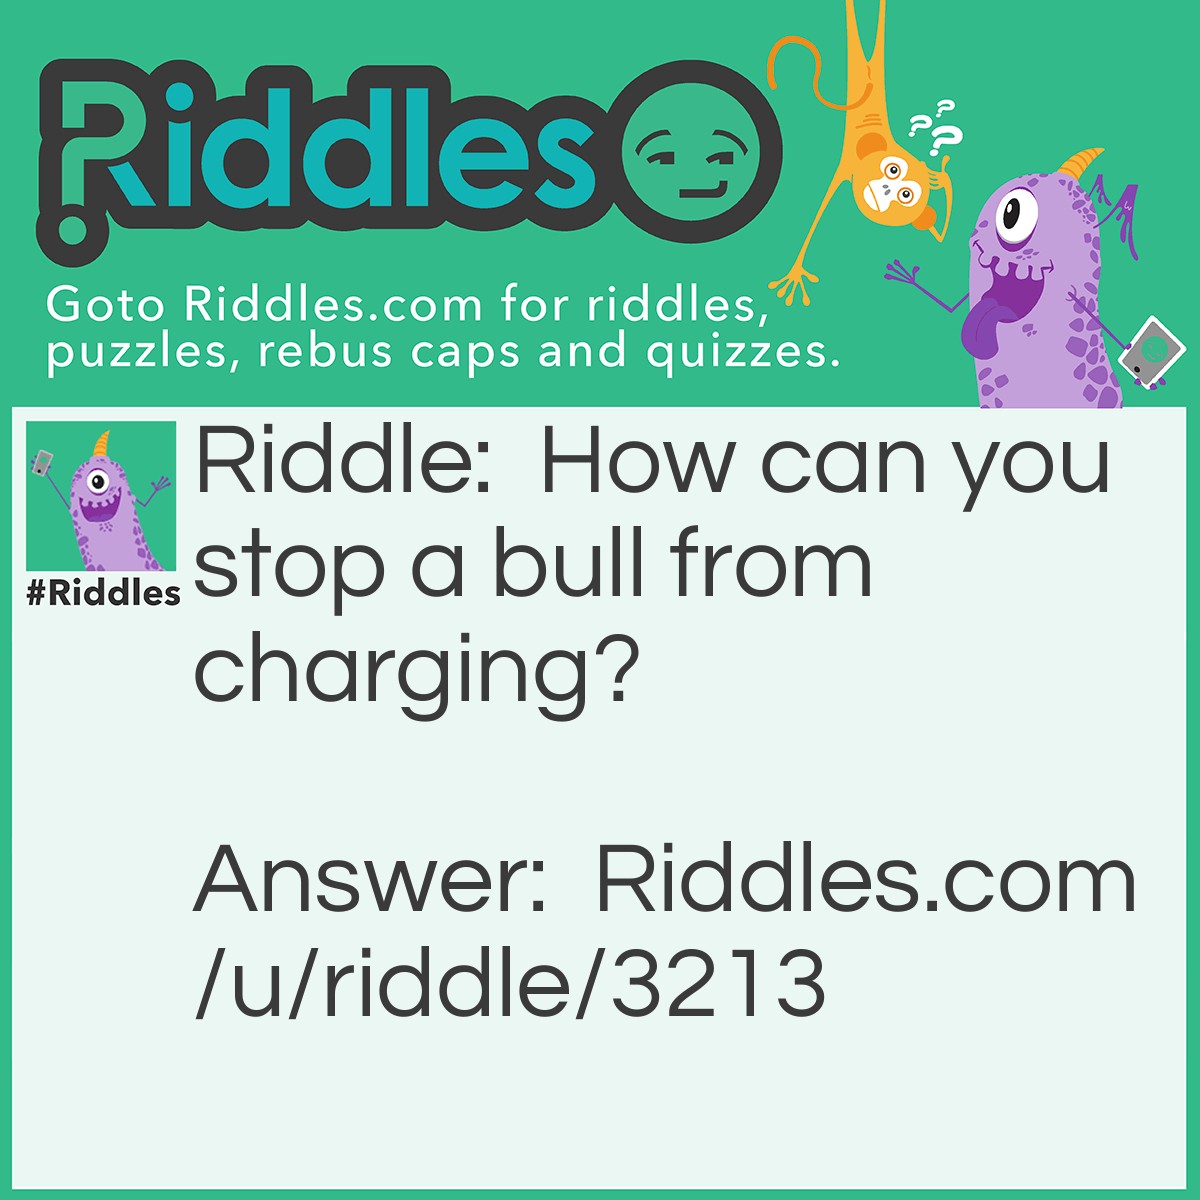 Riddle: How can you stop a bull from charging? Answer: Take away its credit card!